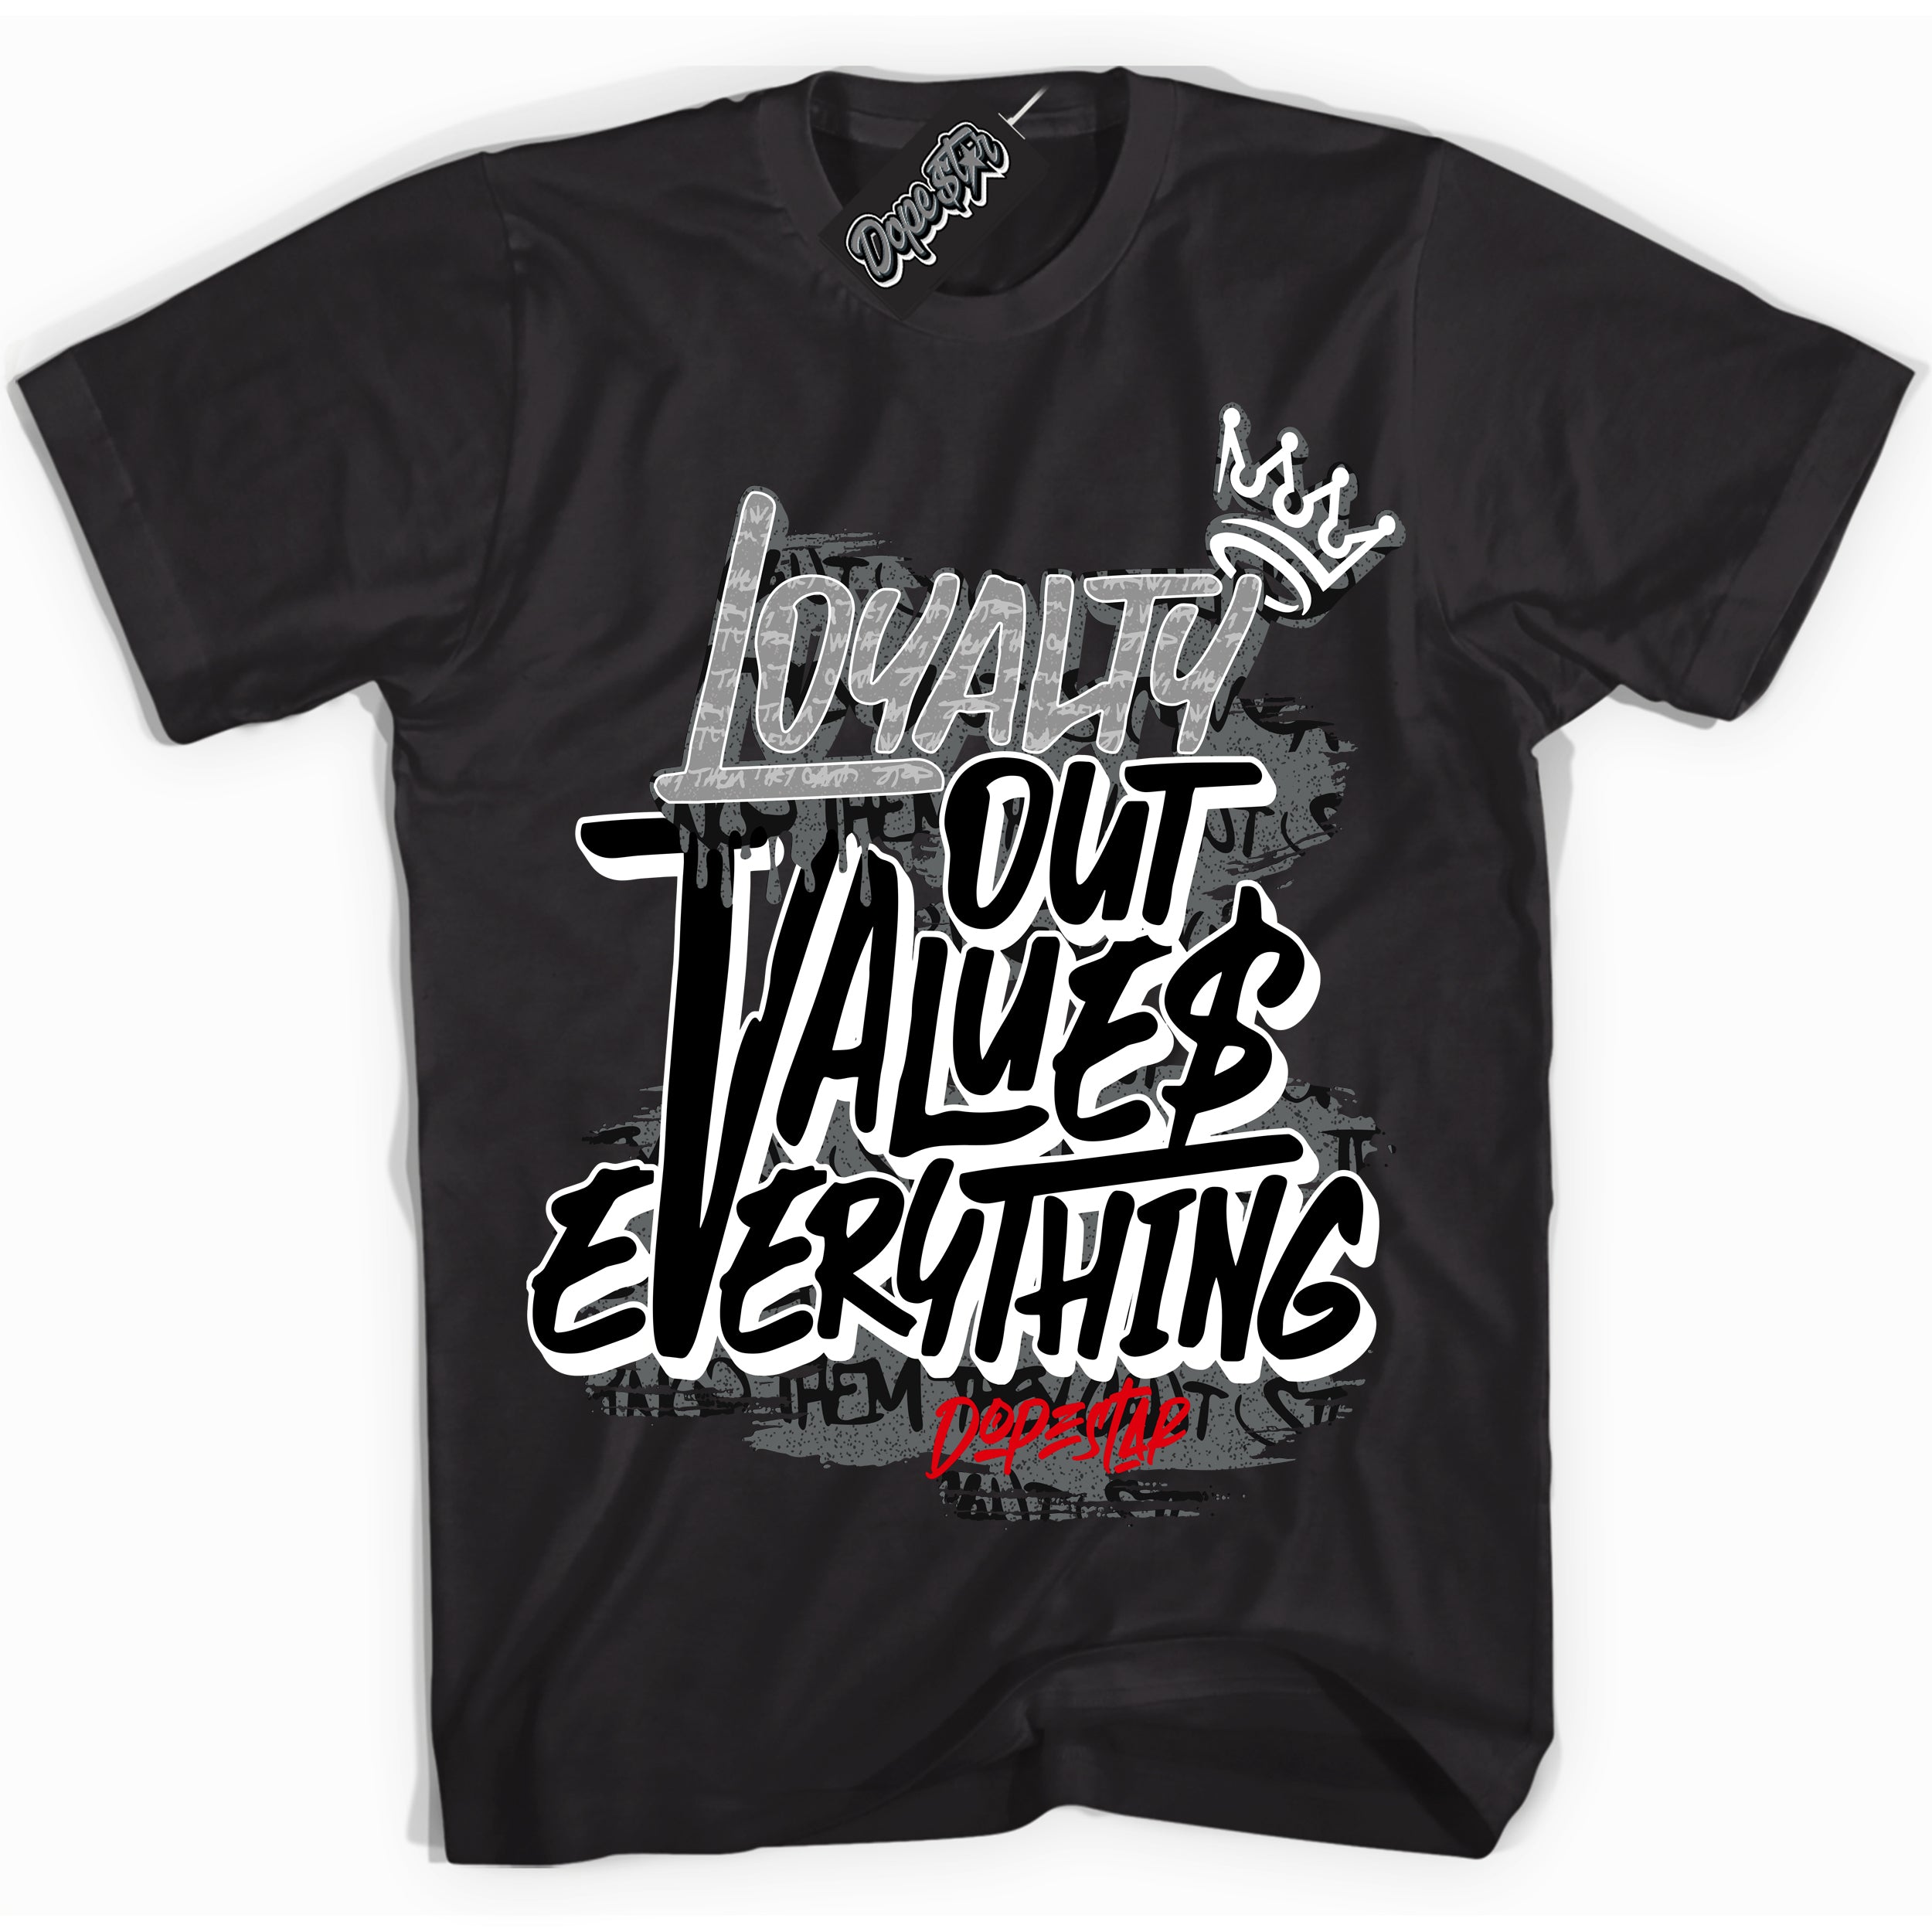 Cool Black Shirt with “ Loyalty Out Values Everything” design that perfectly matches Rebellionaire 1s Sneakers.